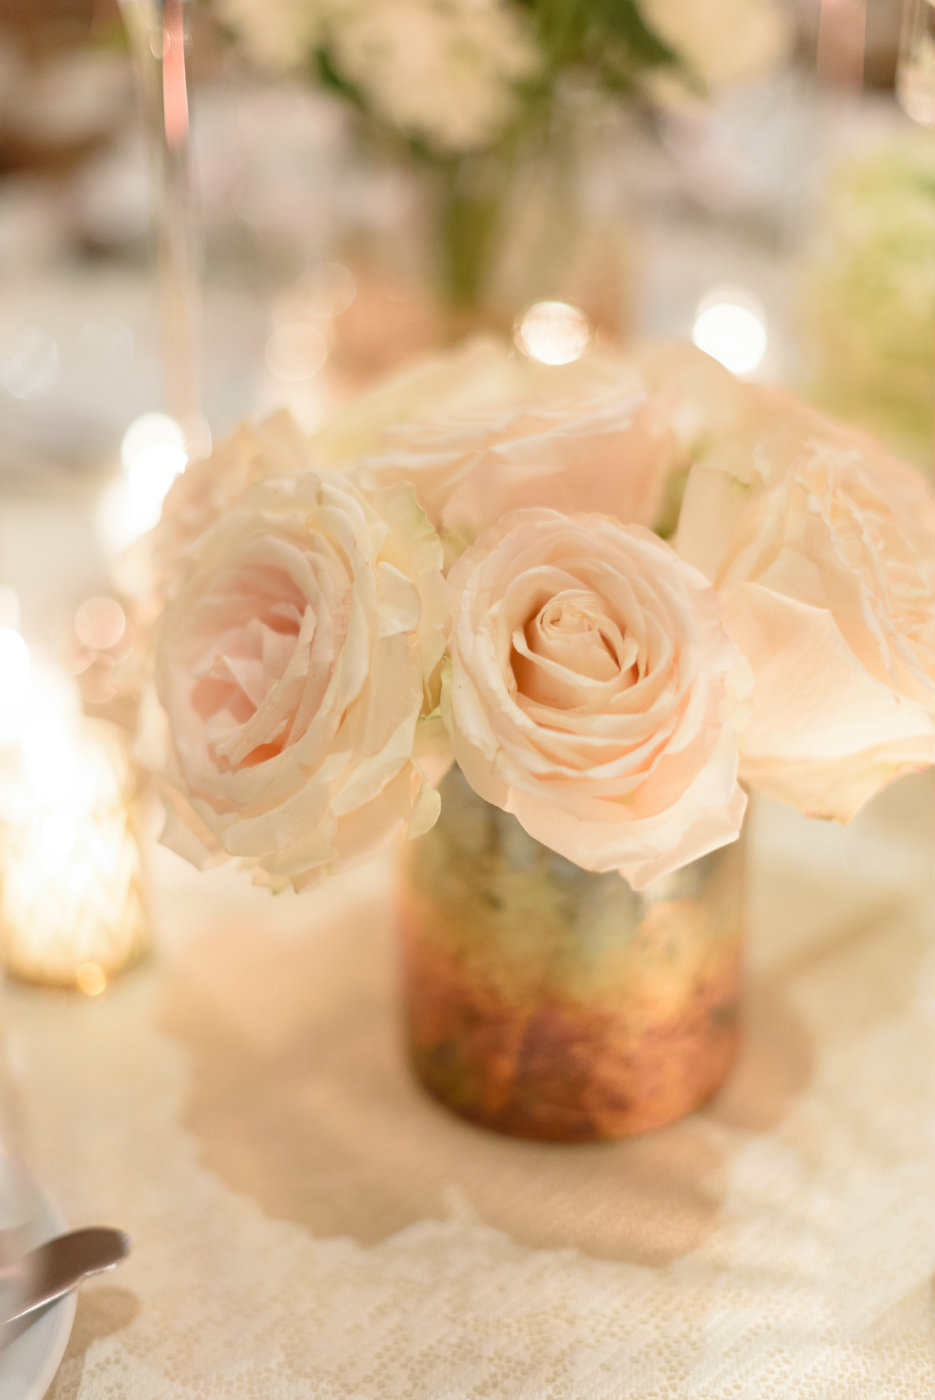 Blush garden roses in a gold vase in a simple arrangement for a sweet winter wedding.